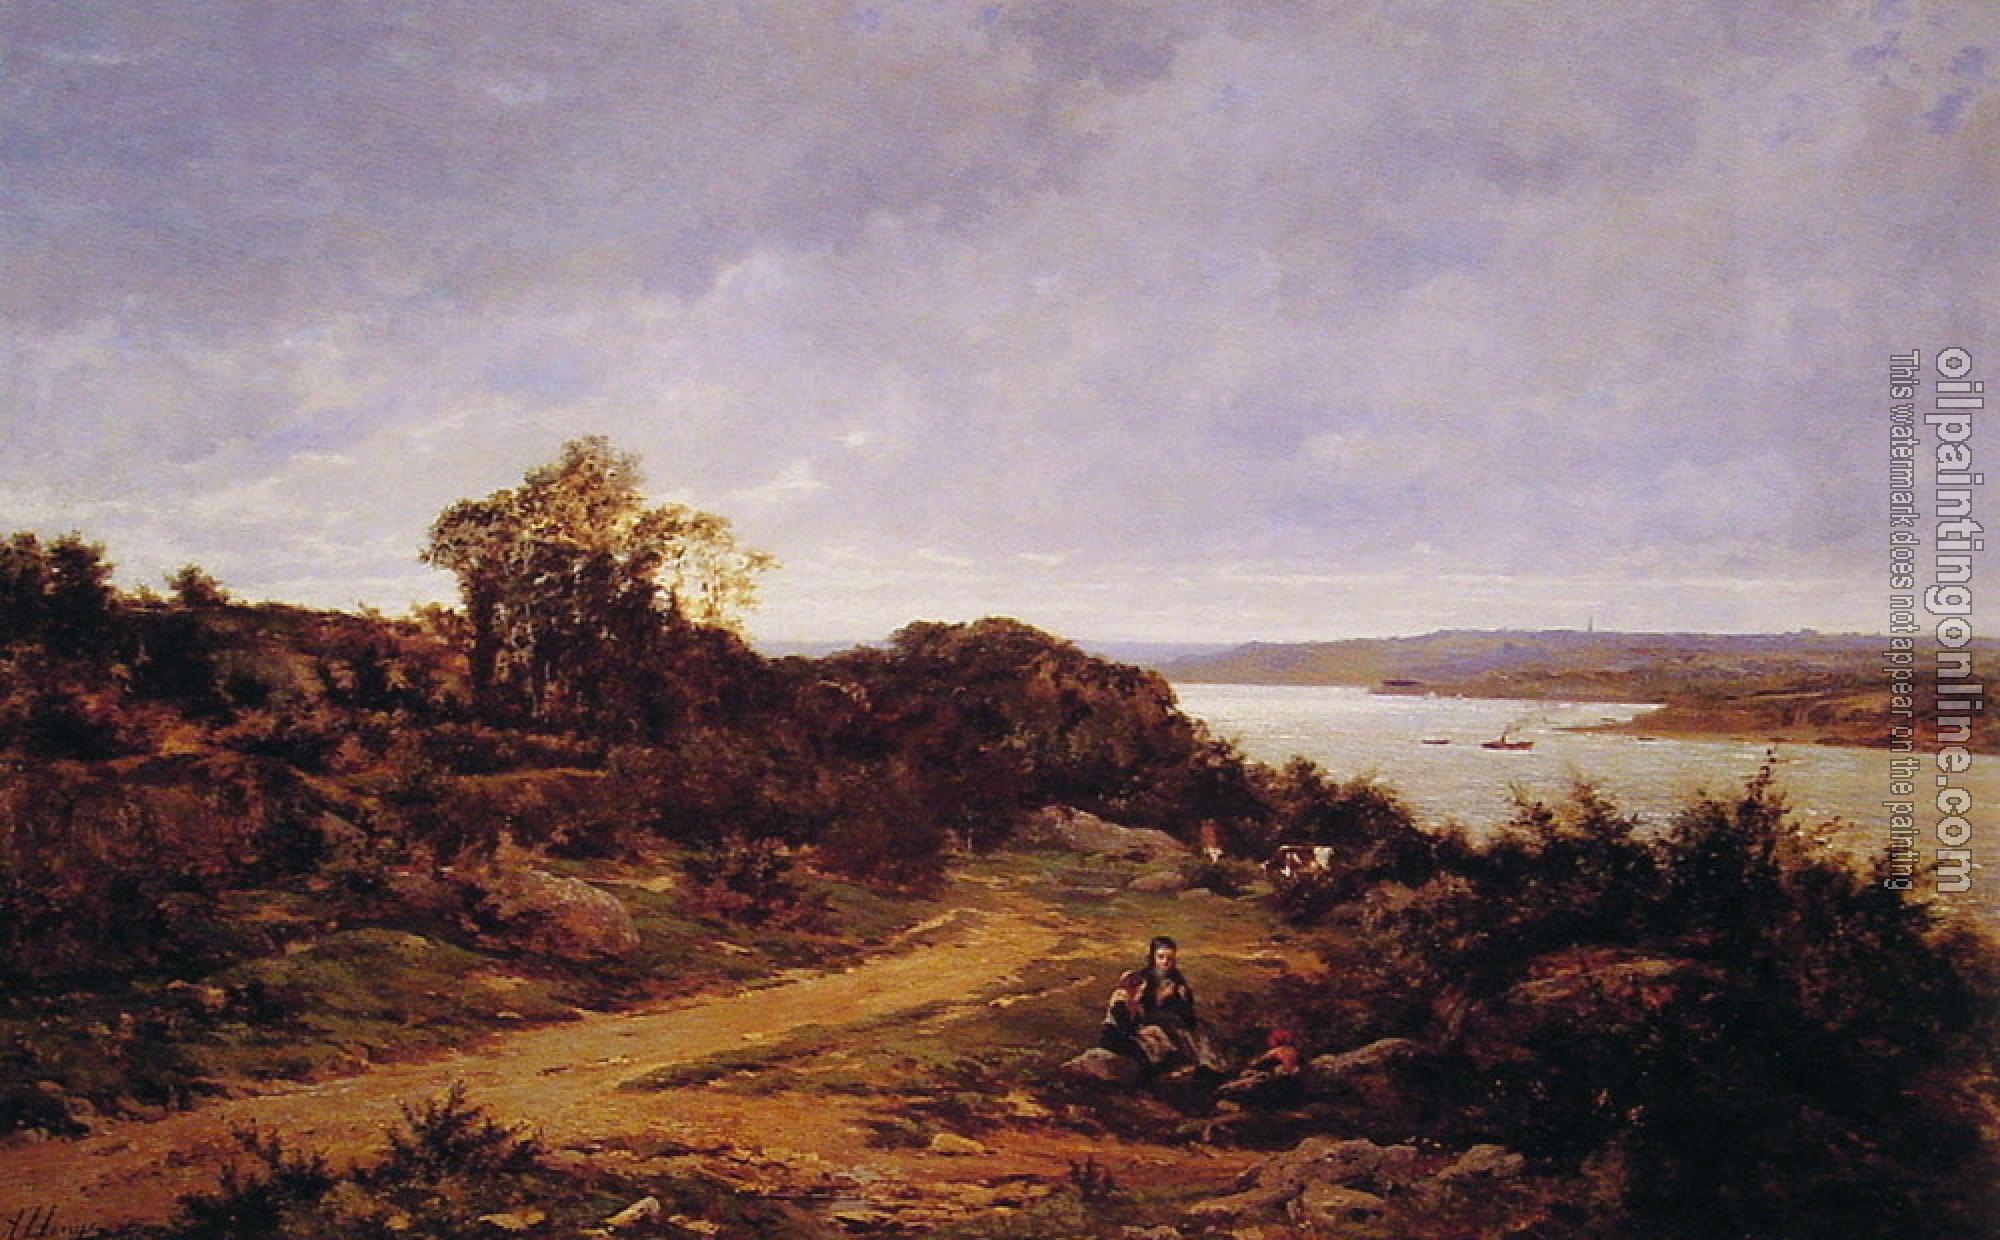 Allonge, Auguste - View from Plougastel, Brittany